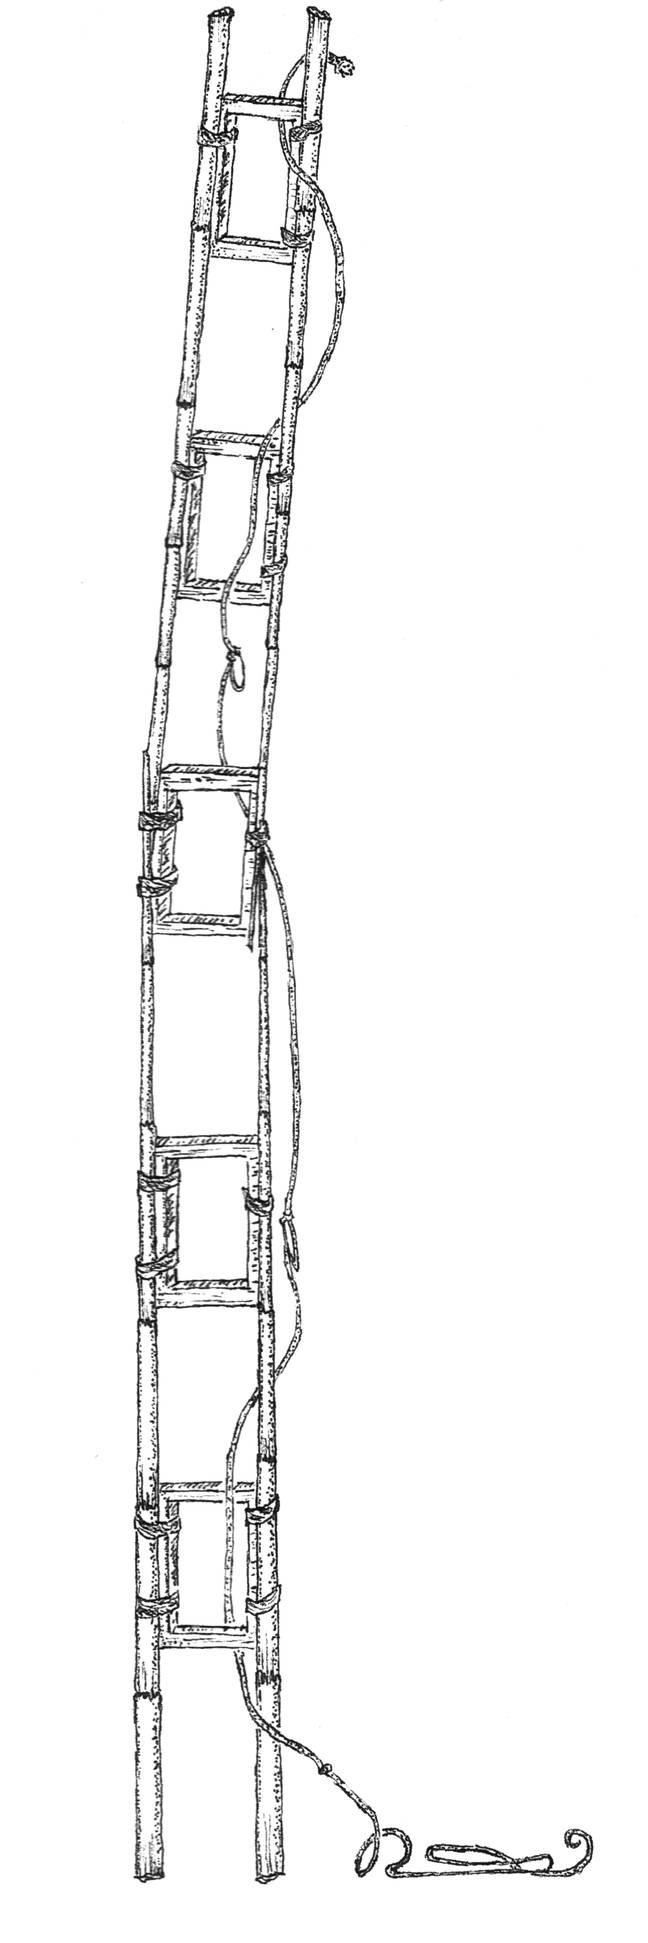 Design for the bamboo ladder McMillan used. Credit: David McMillan/Supplied